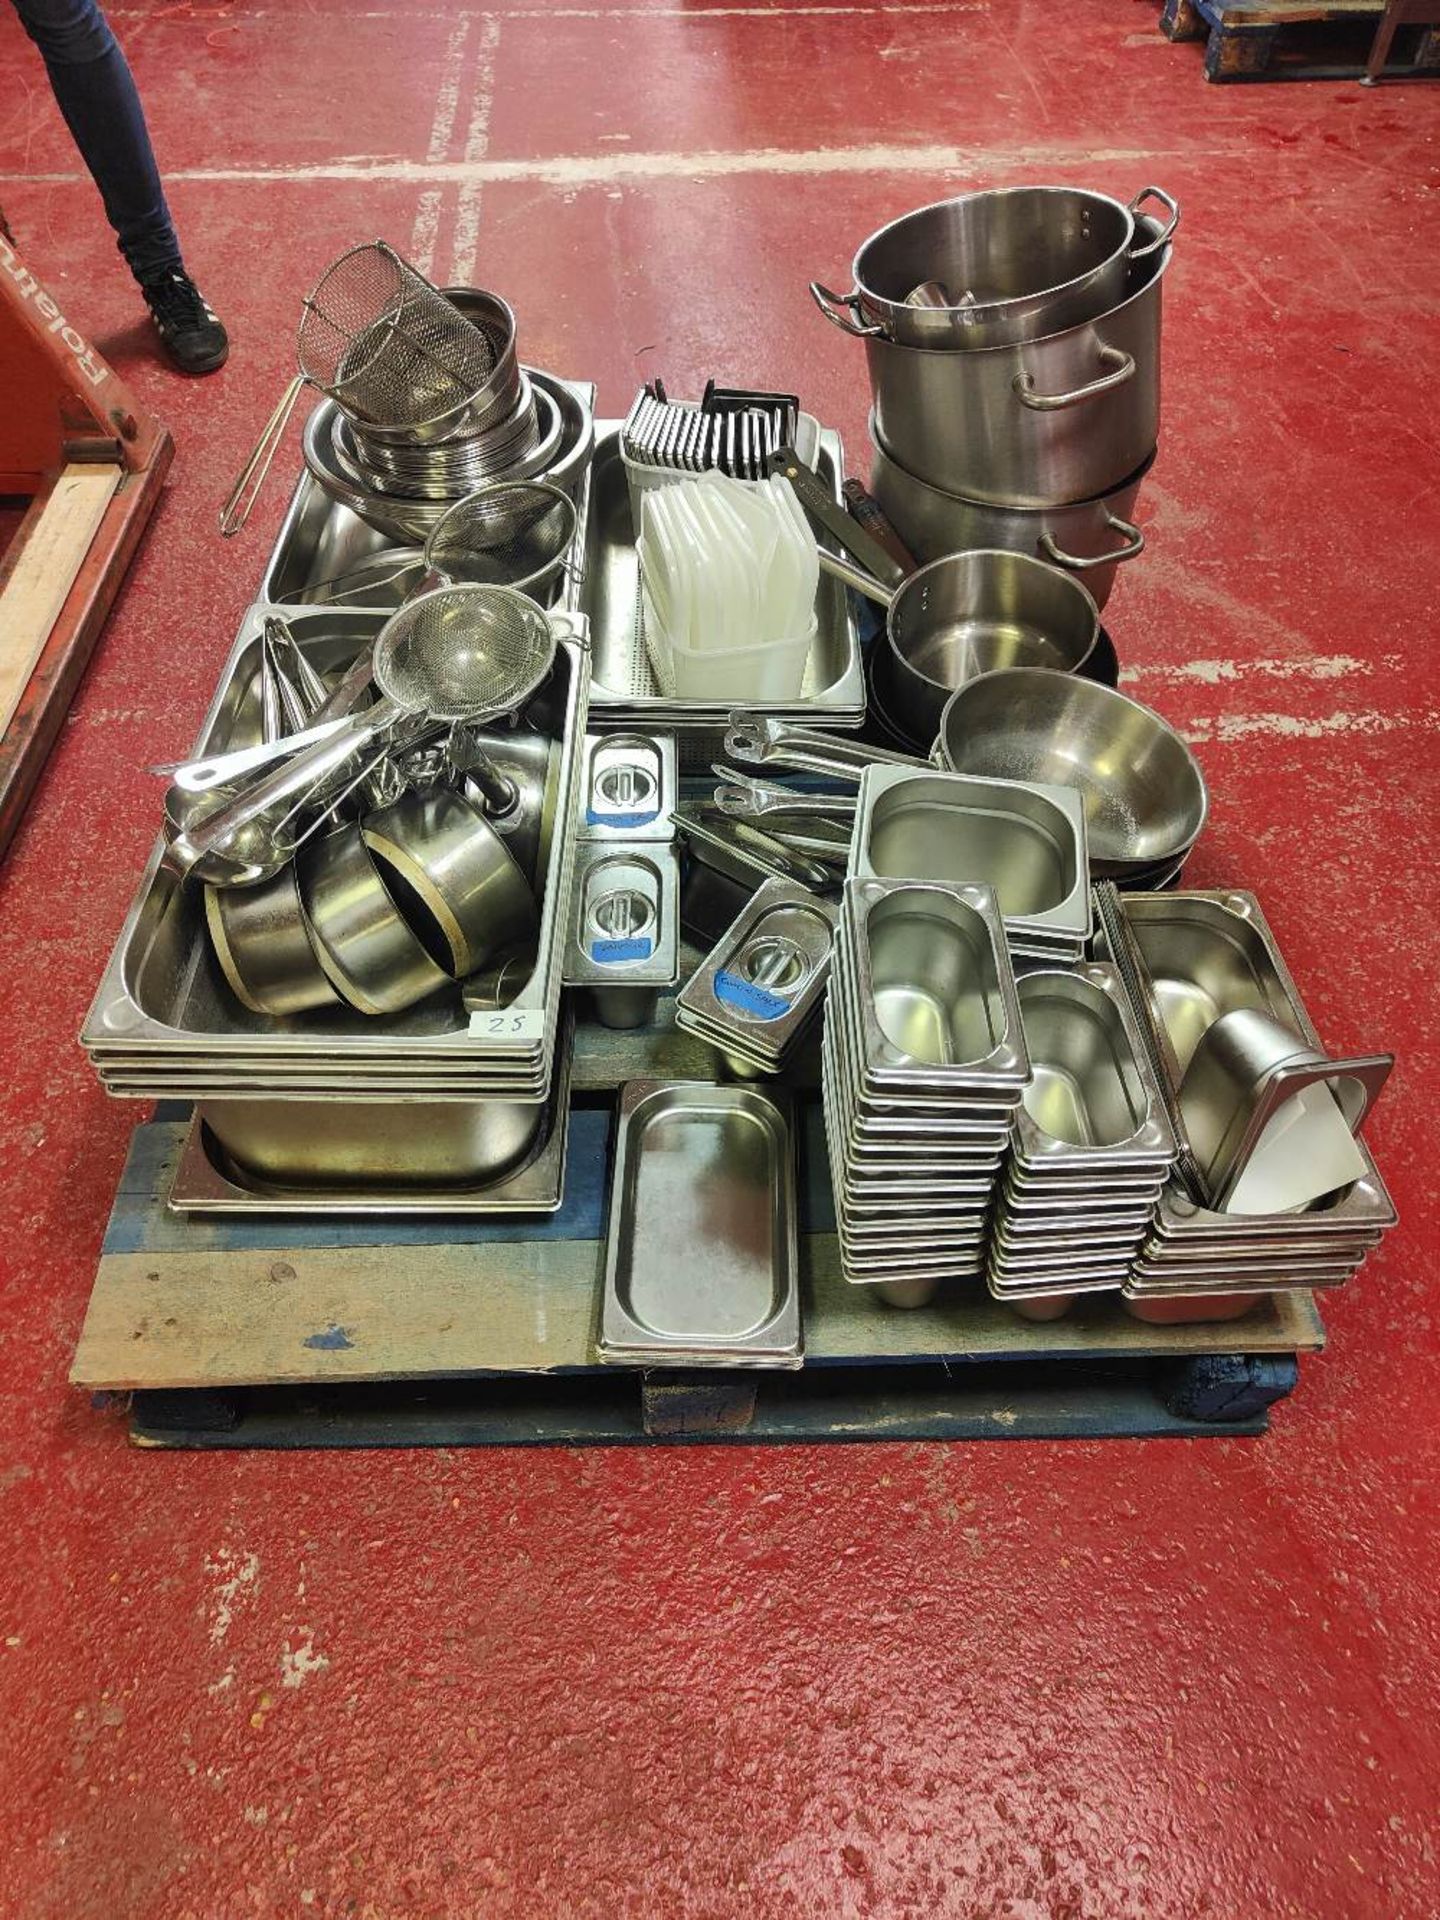 Large Quantity of Stainless Steel Cooking Equipment and Utensils